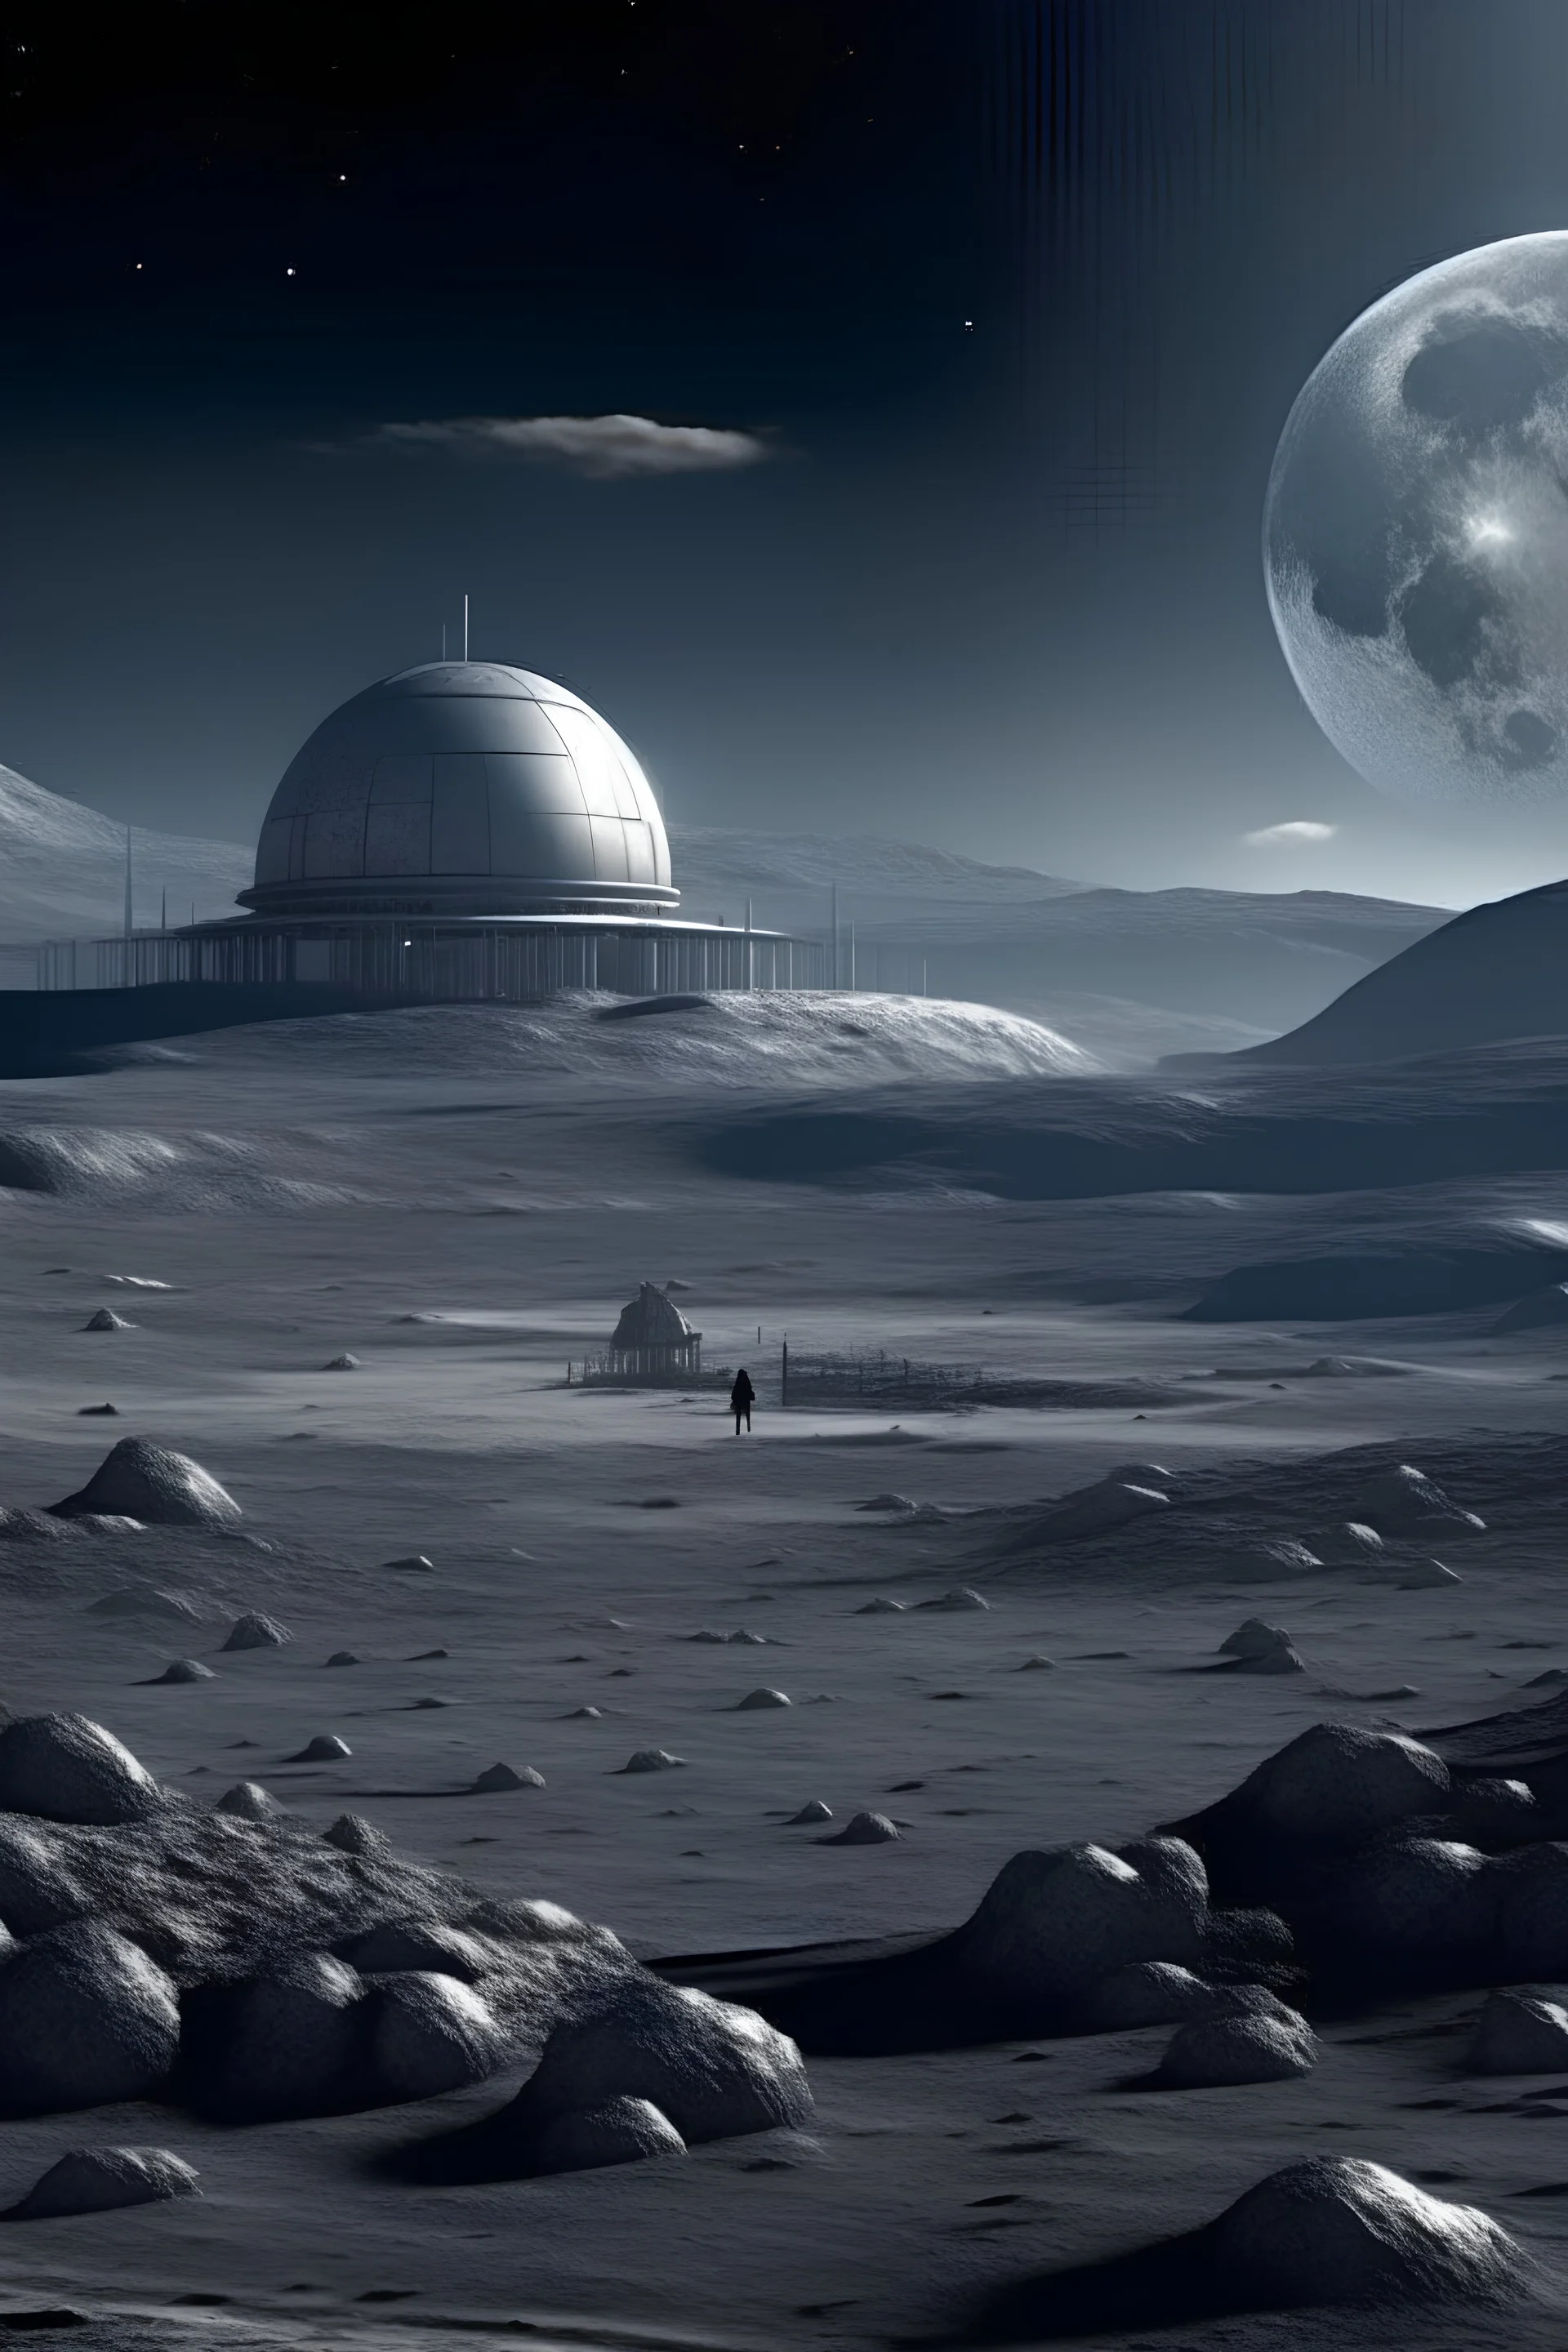 secret extraterrestrial base on the moon with planet earth in the background